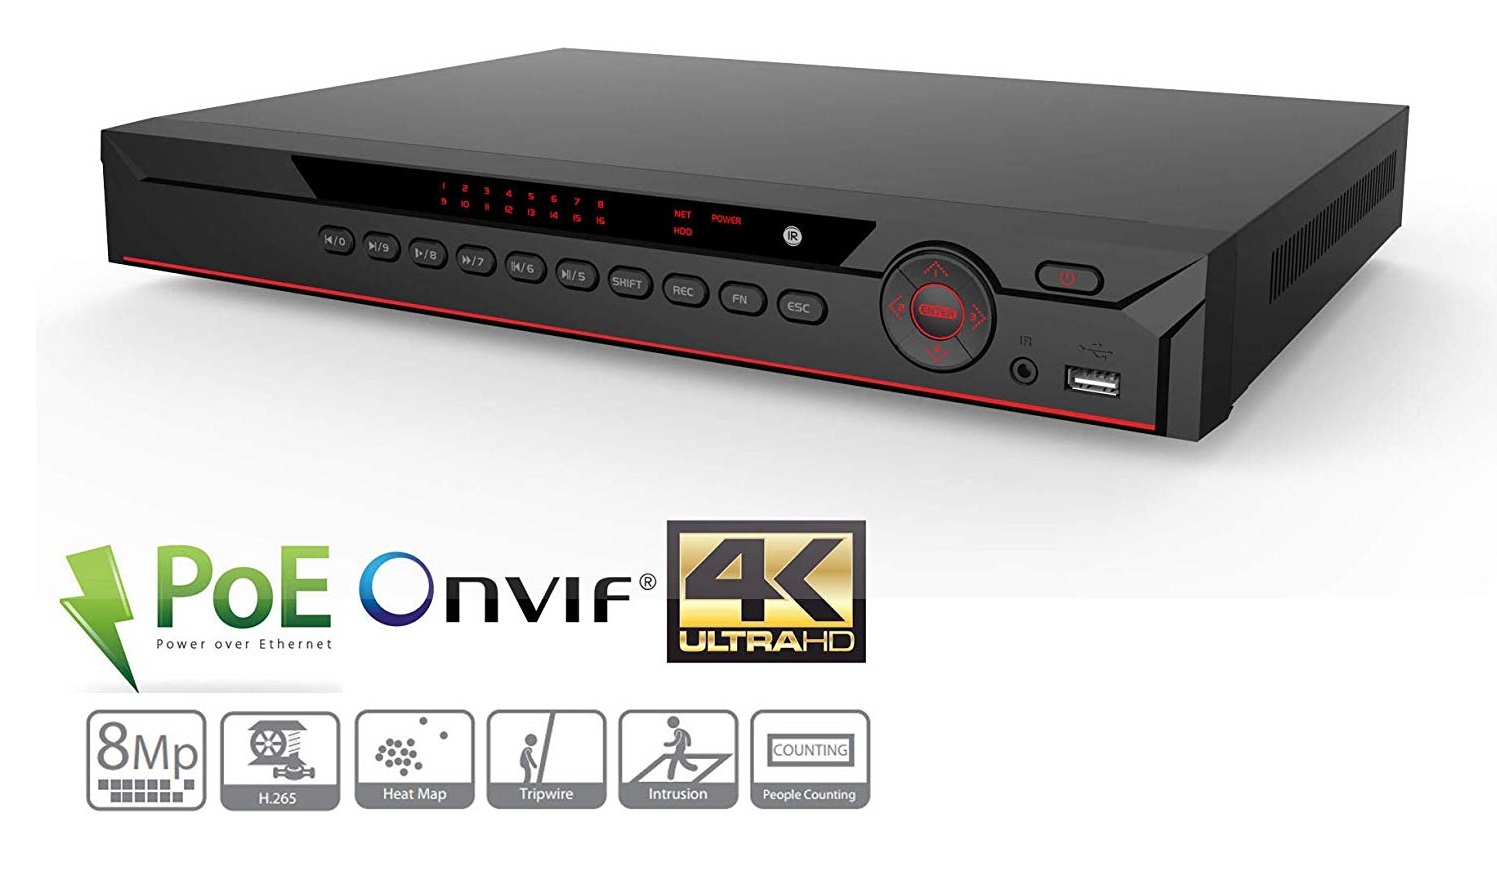 Dahua 4K 16 Channel PoE Network Video Recorder, NVR4216-16P-4KS2 - Click Image to Close